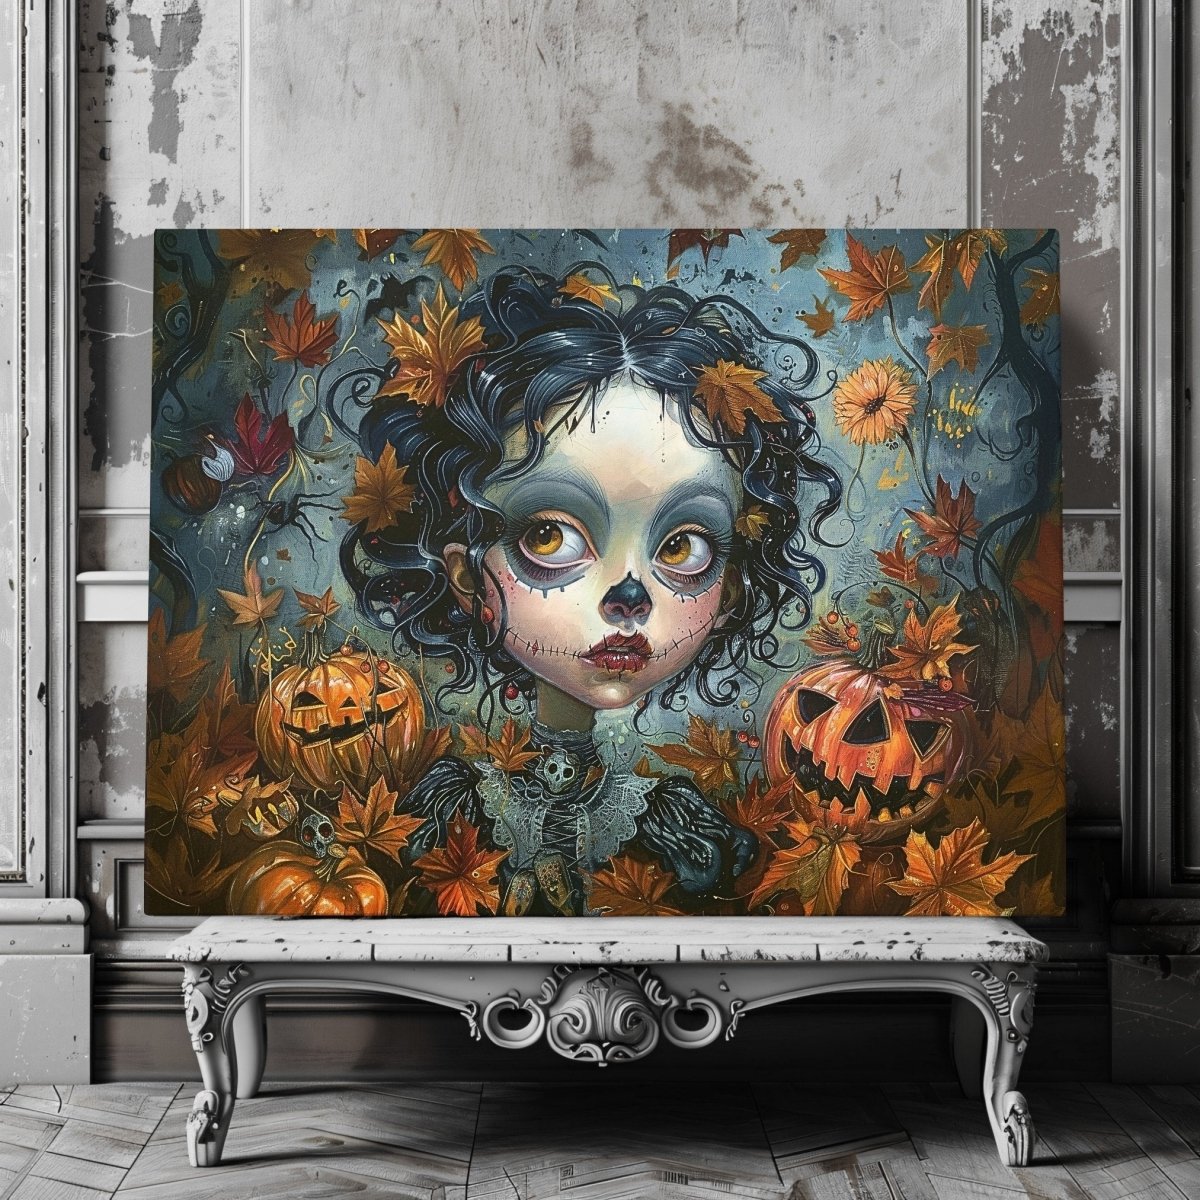 Goth Girl in Halloween Mood - Whimsigoth Decor for the Spooky Season - Gothic Canvas Wall Art - Everything Pixel